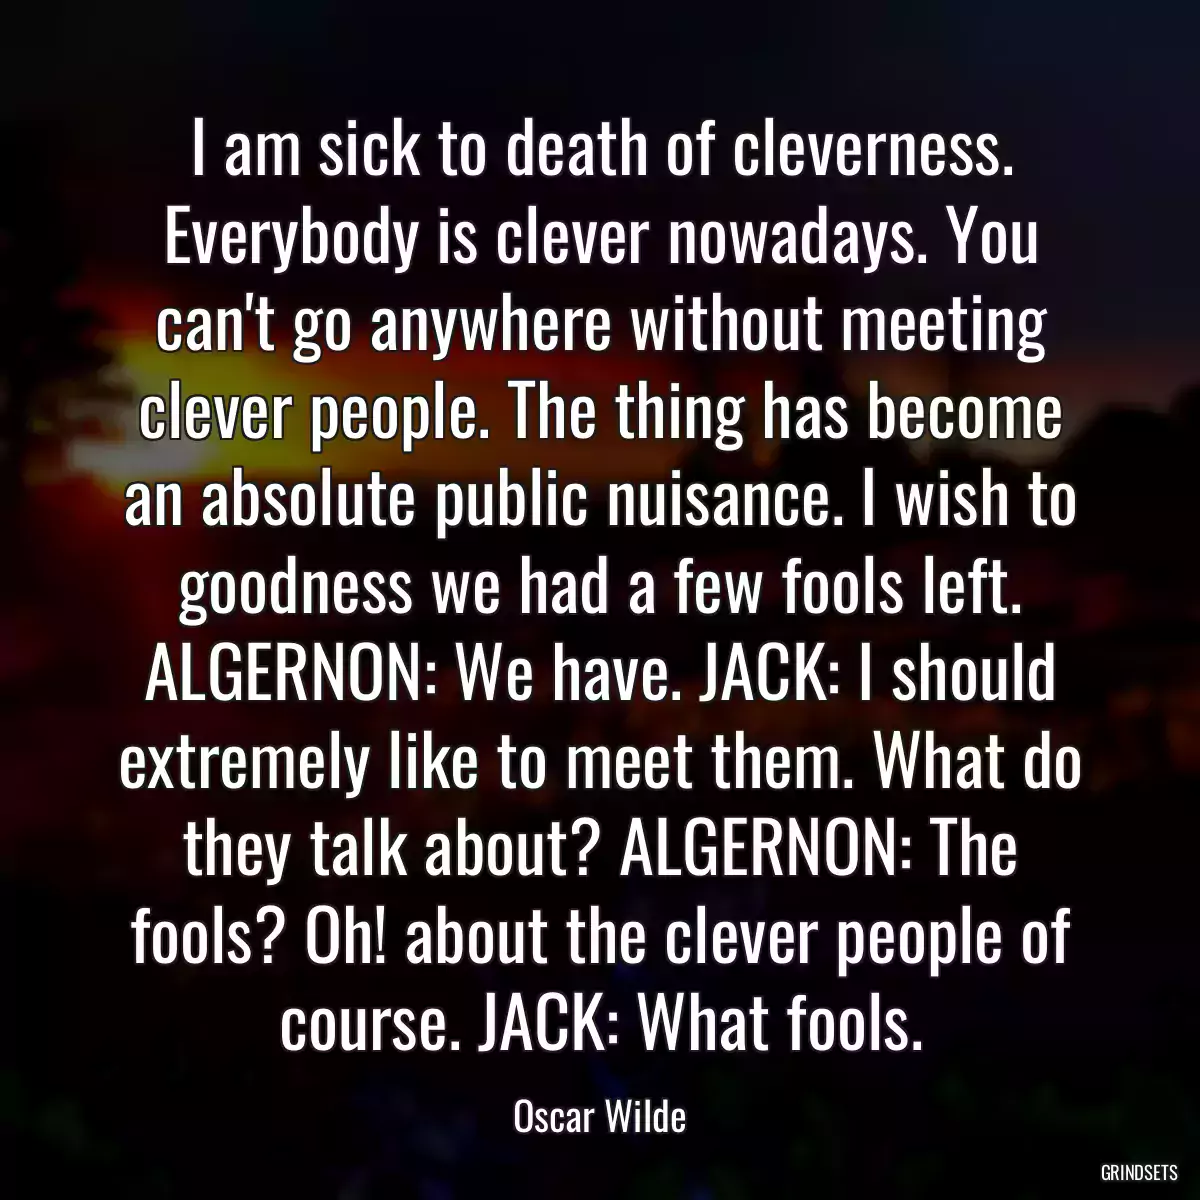 I am sick to death of cleverness. Everybody is clever nowadays. You can\'t go anywhere without meeting clever people. The thing has become an absolute public nuisance. I wish to goodness we had a few fools left. ALGERNON: We have. JACK: I should extremely like to meet them. What do they talk about? ALGERNON: The fools? Oh! about the clever people of course. JACK: What fools.